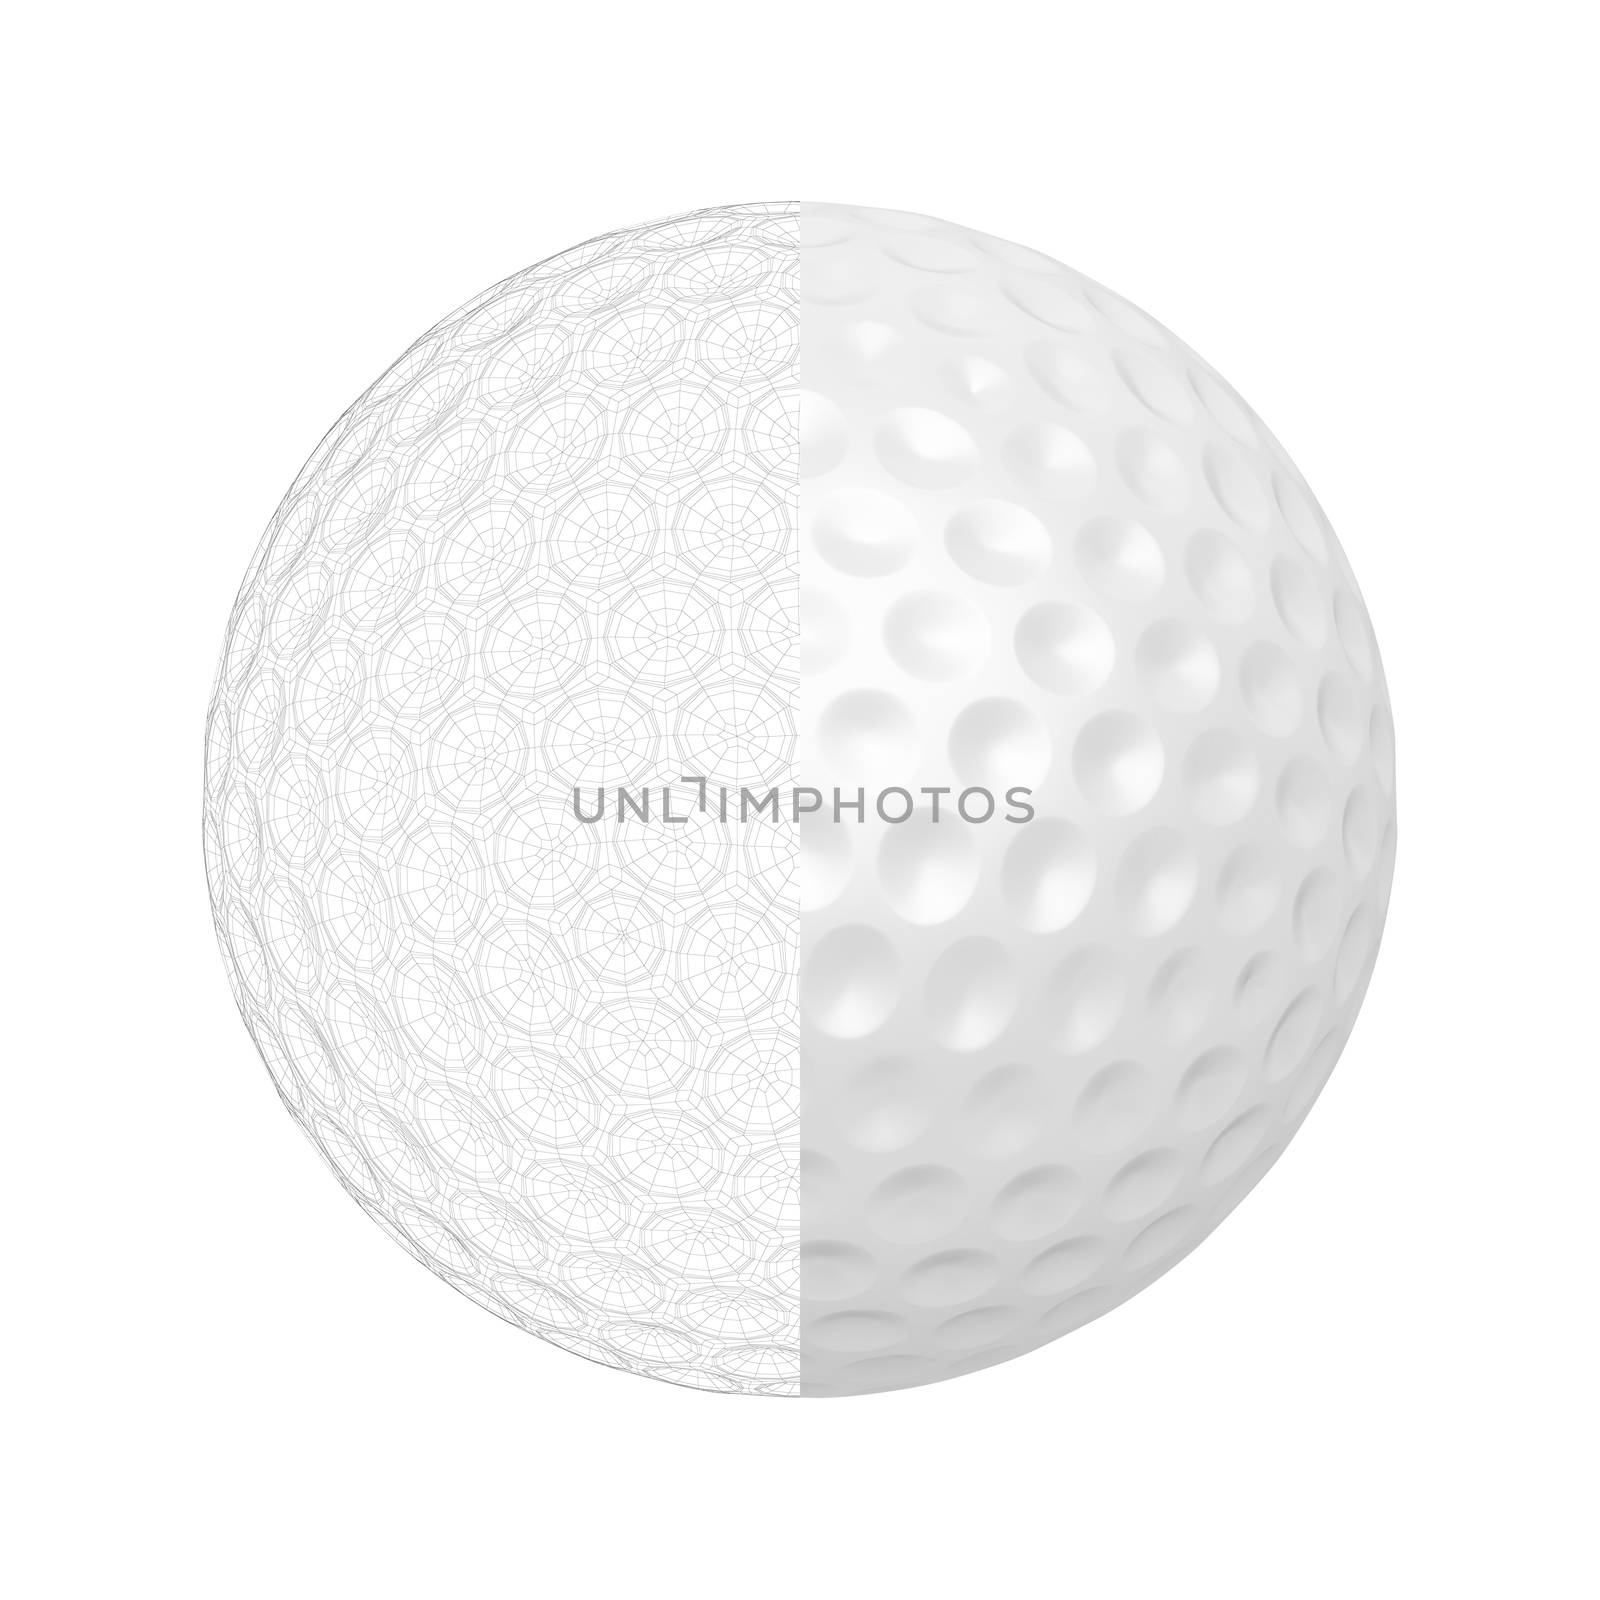 3D model of golf ball by magraphics